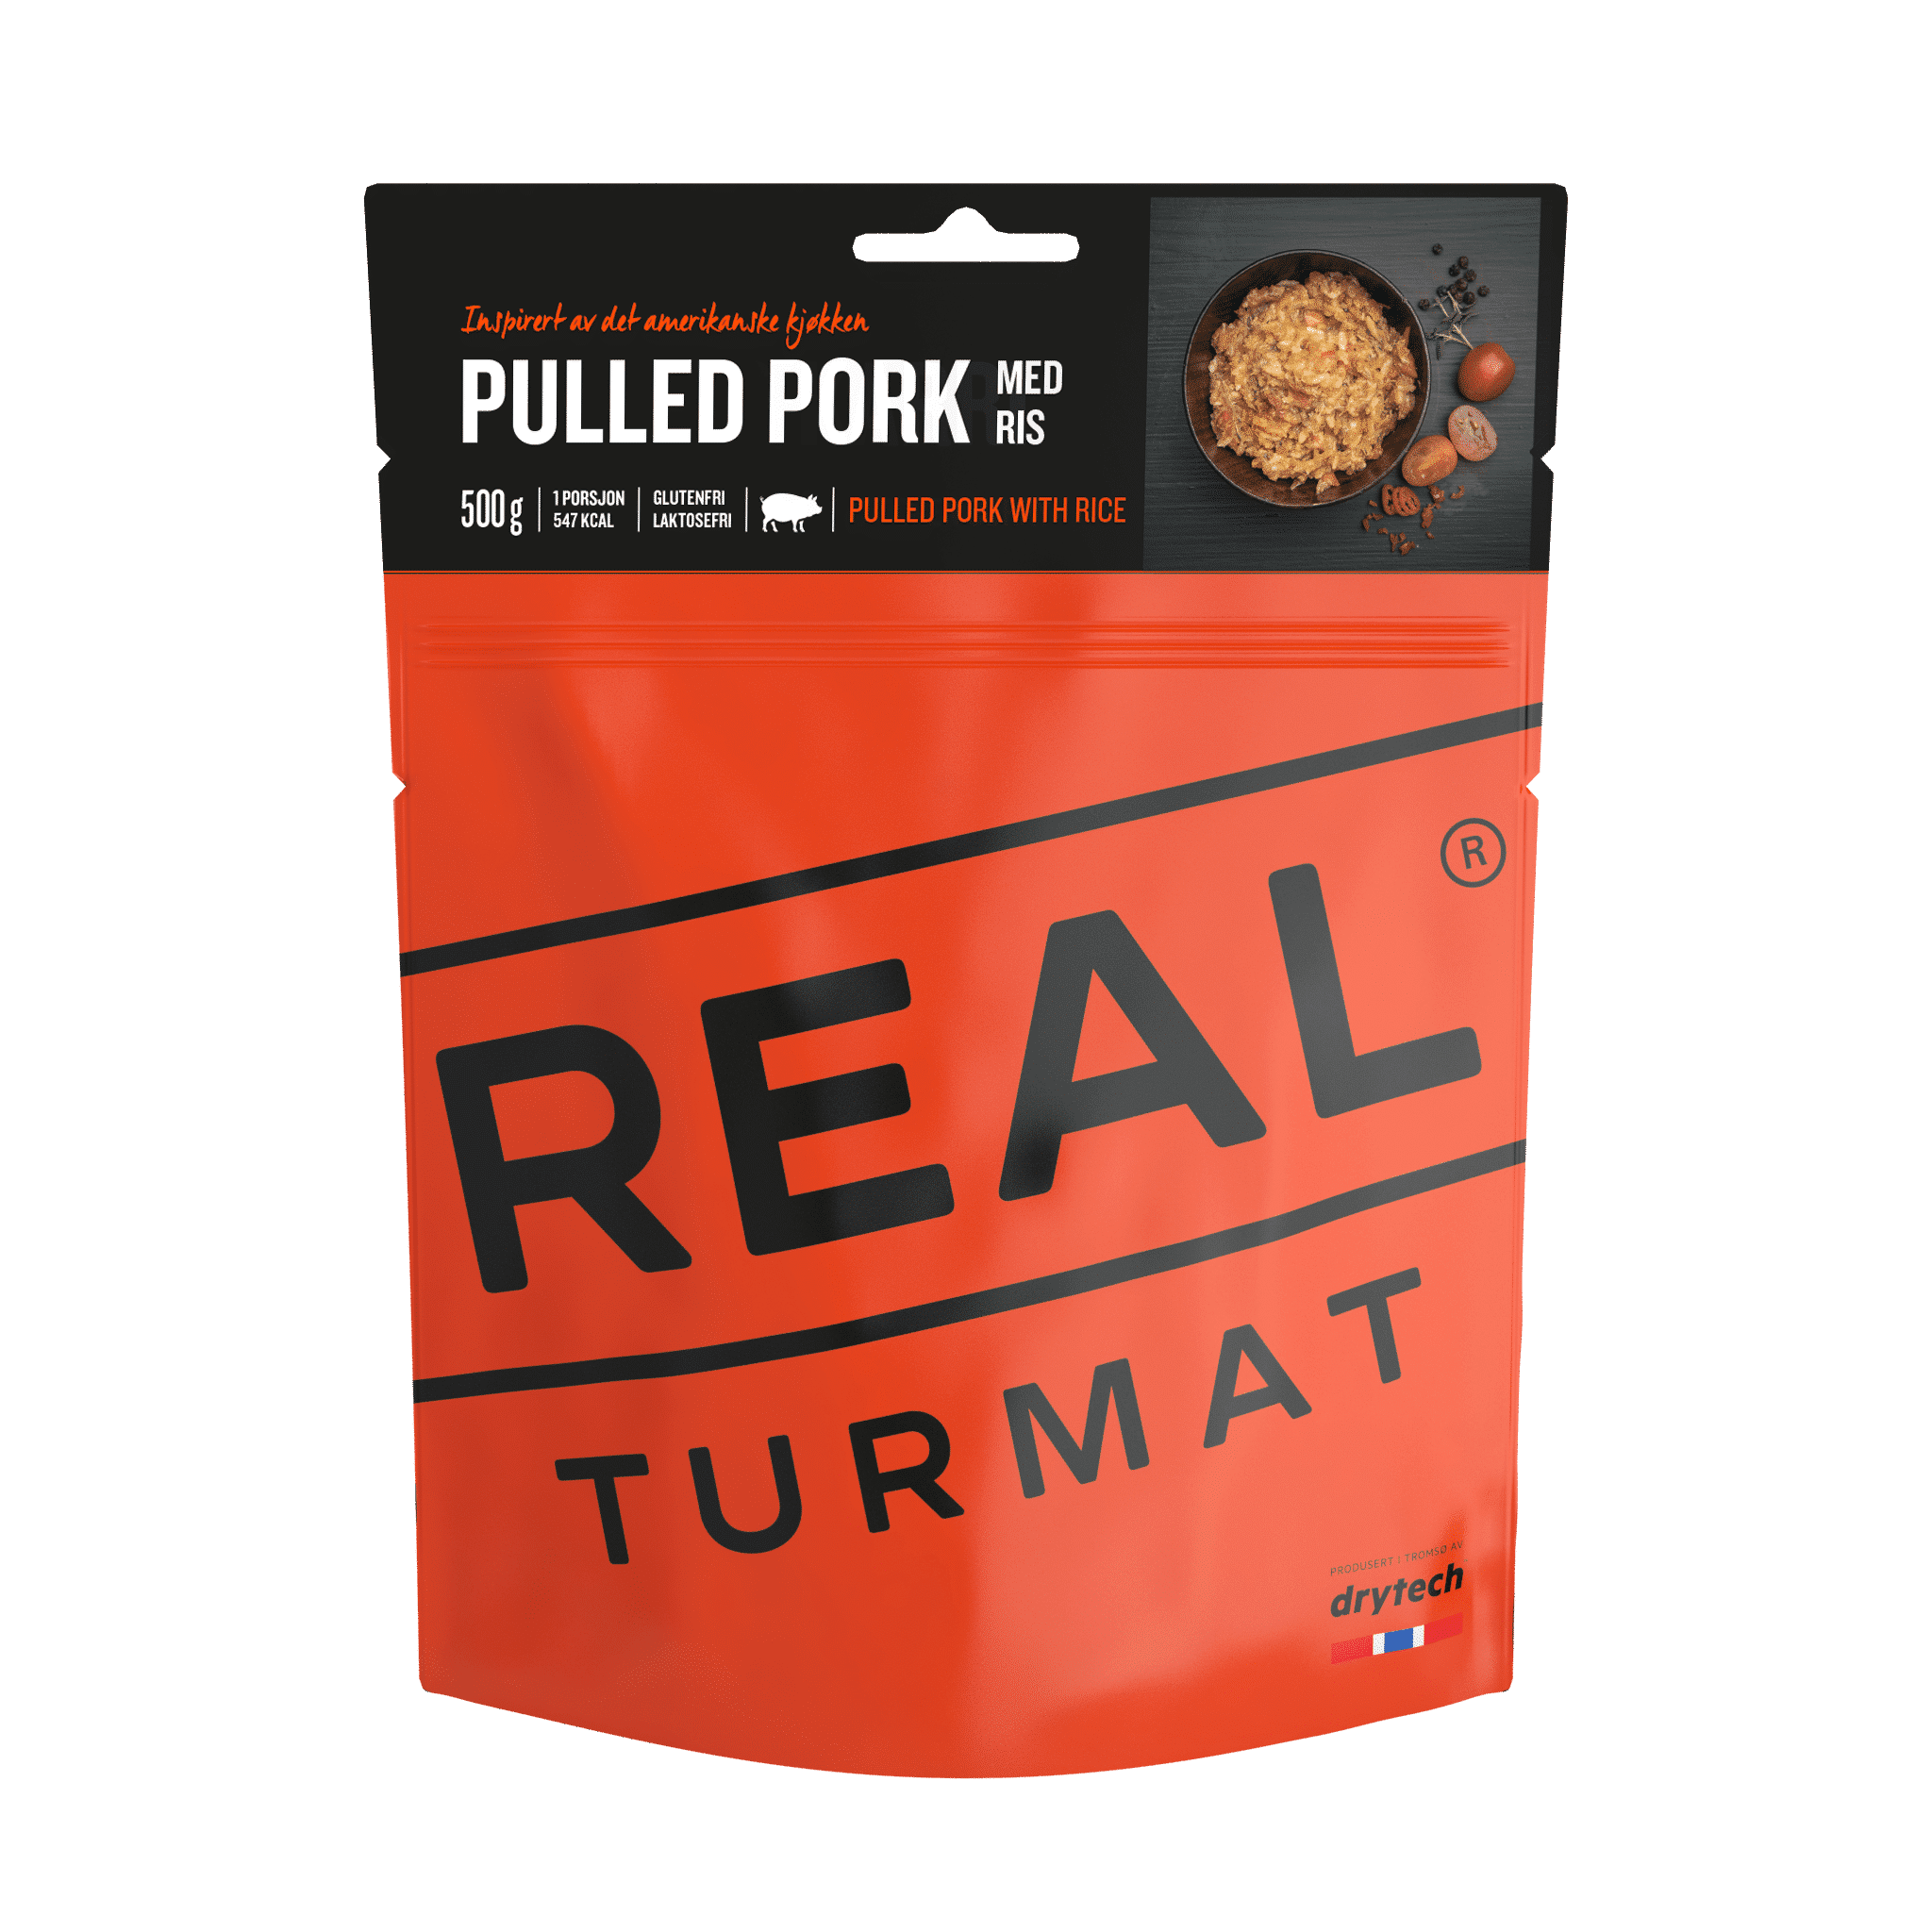 REAL TURMAT - Pulled Pork with Rice